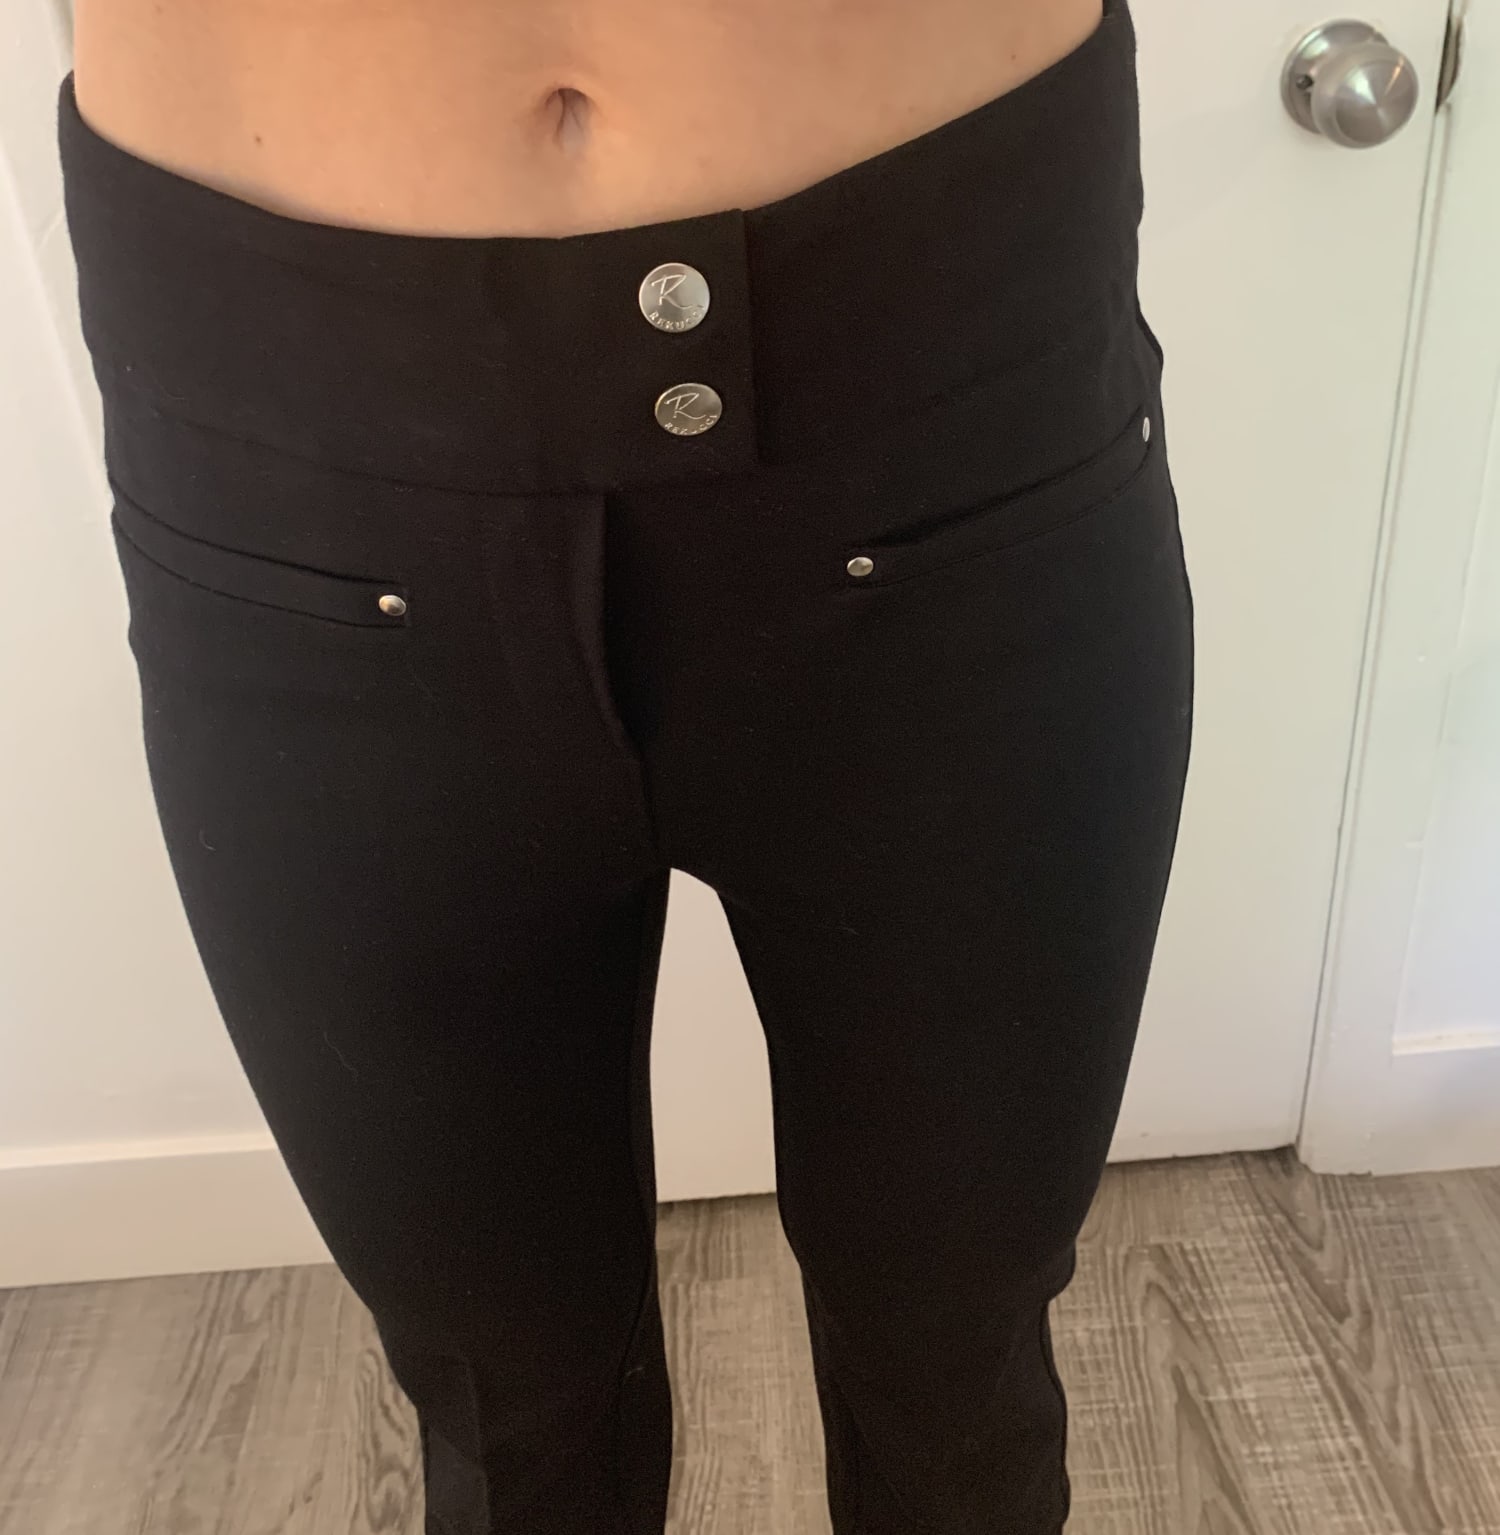 Discover more than 81 stomach slimming pants latest - in.eteachers